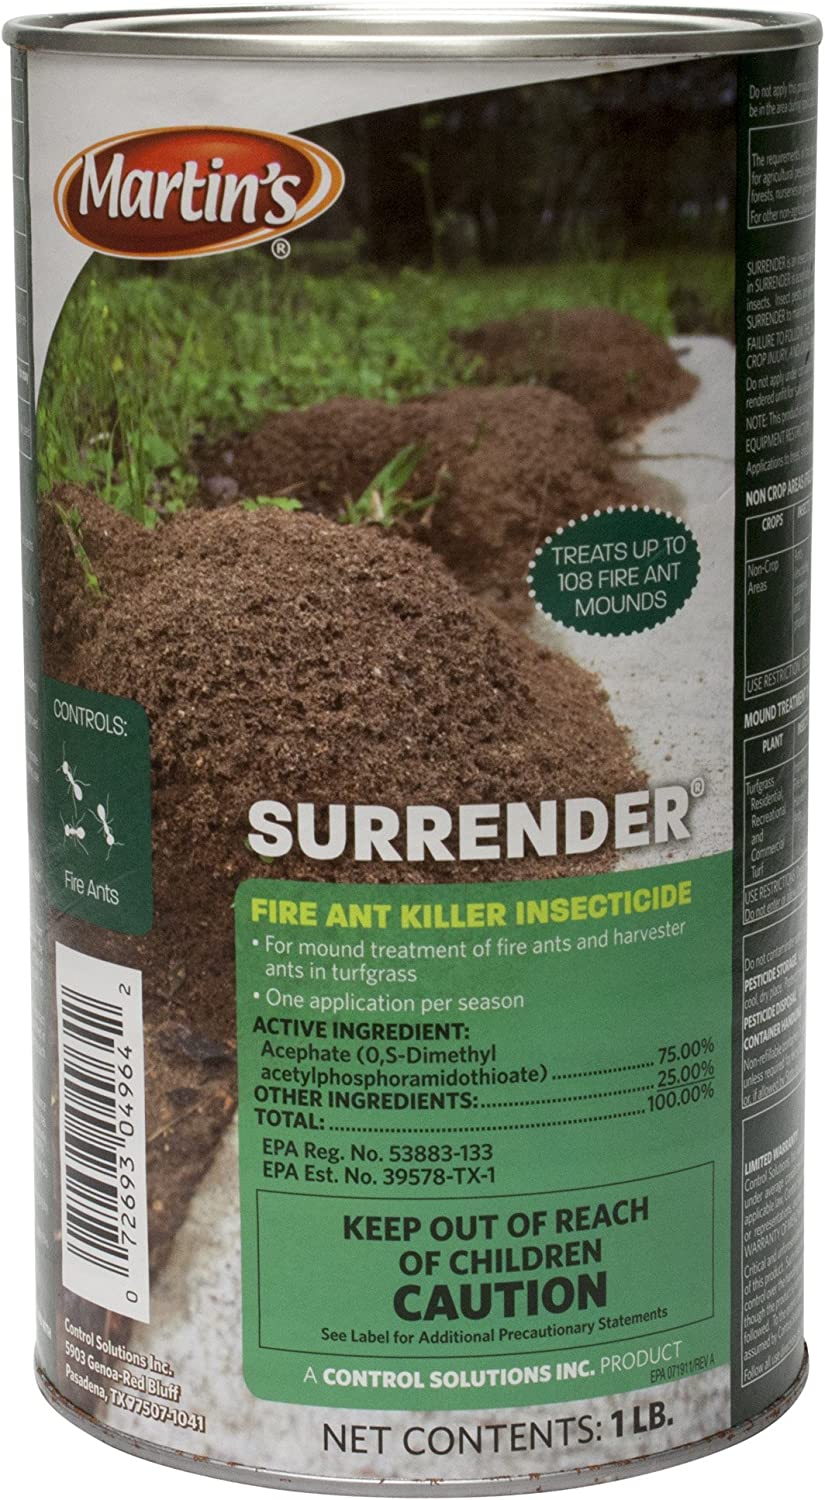 Surrender Fire Ant Killer with Acephate